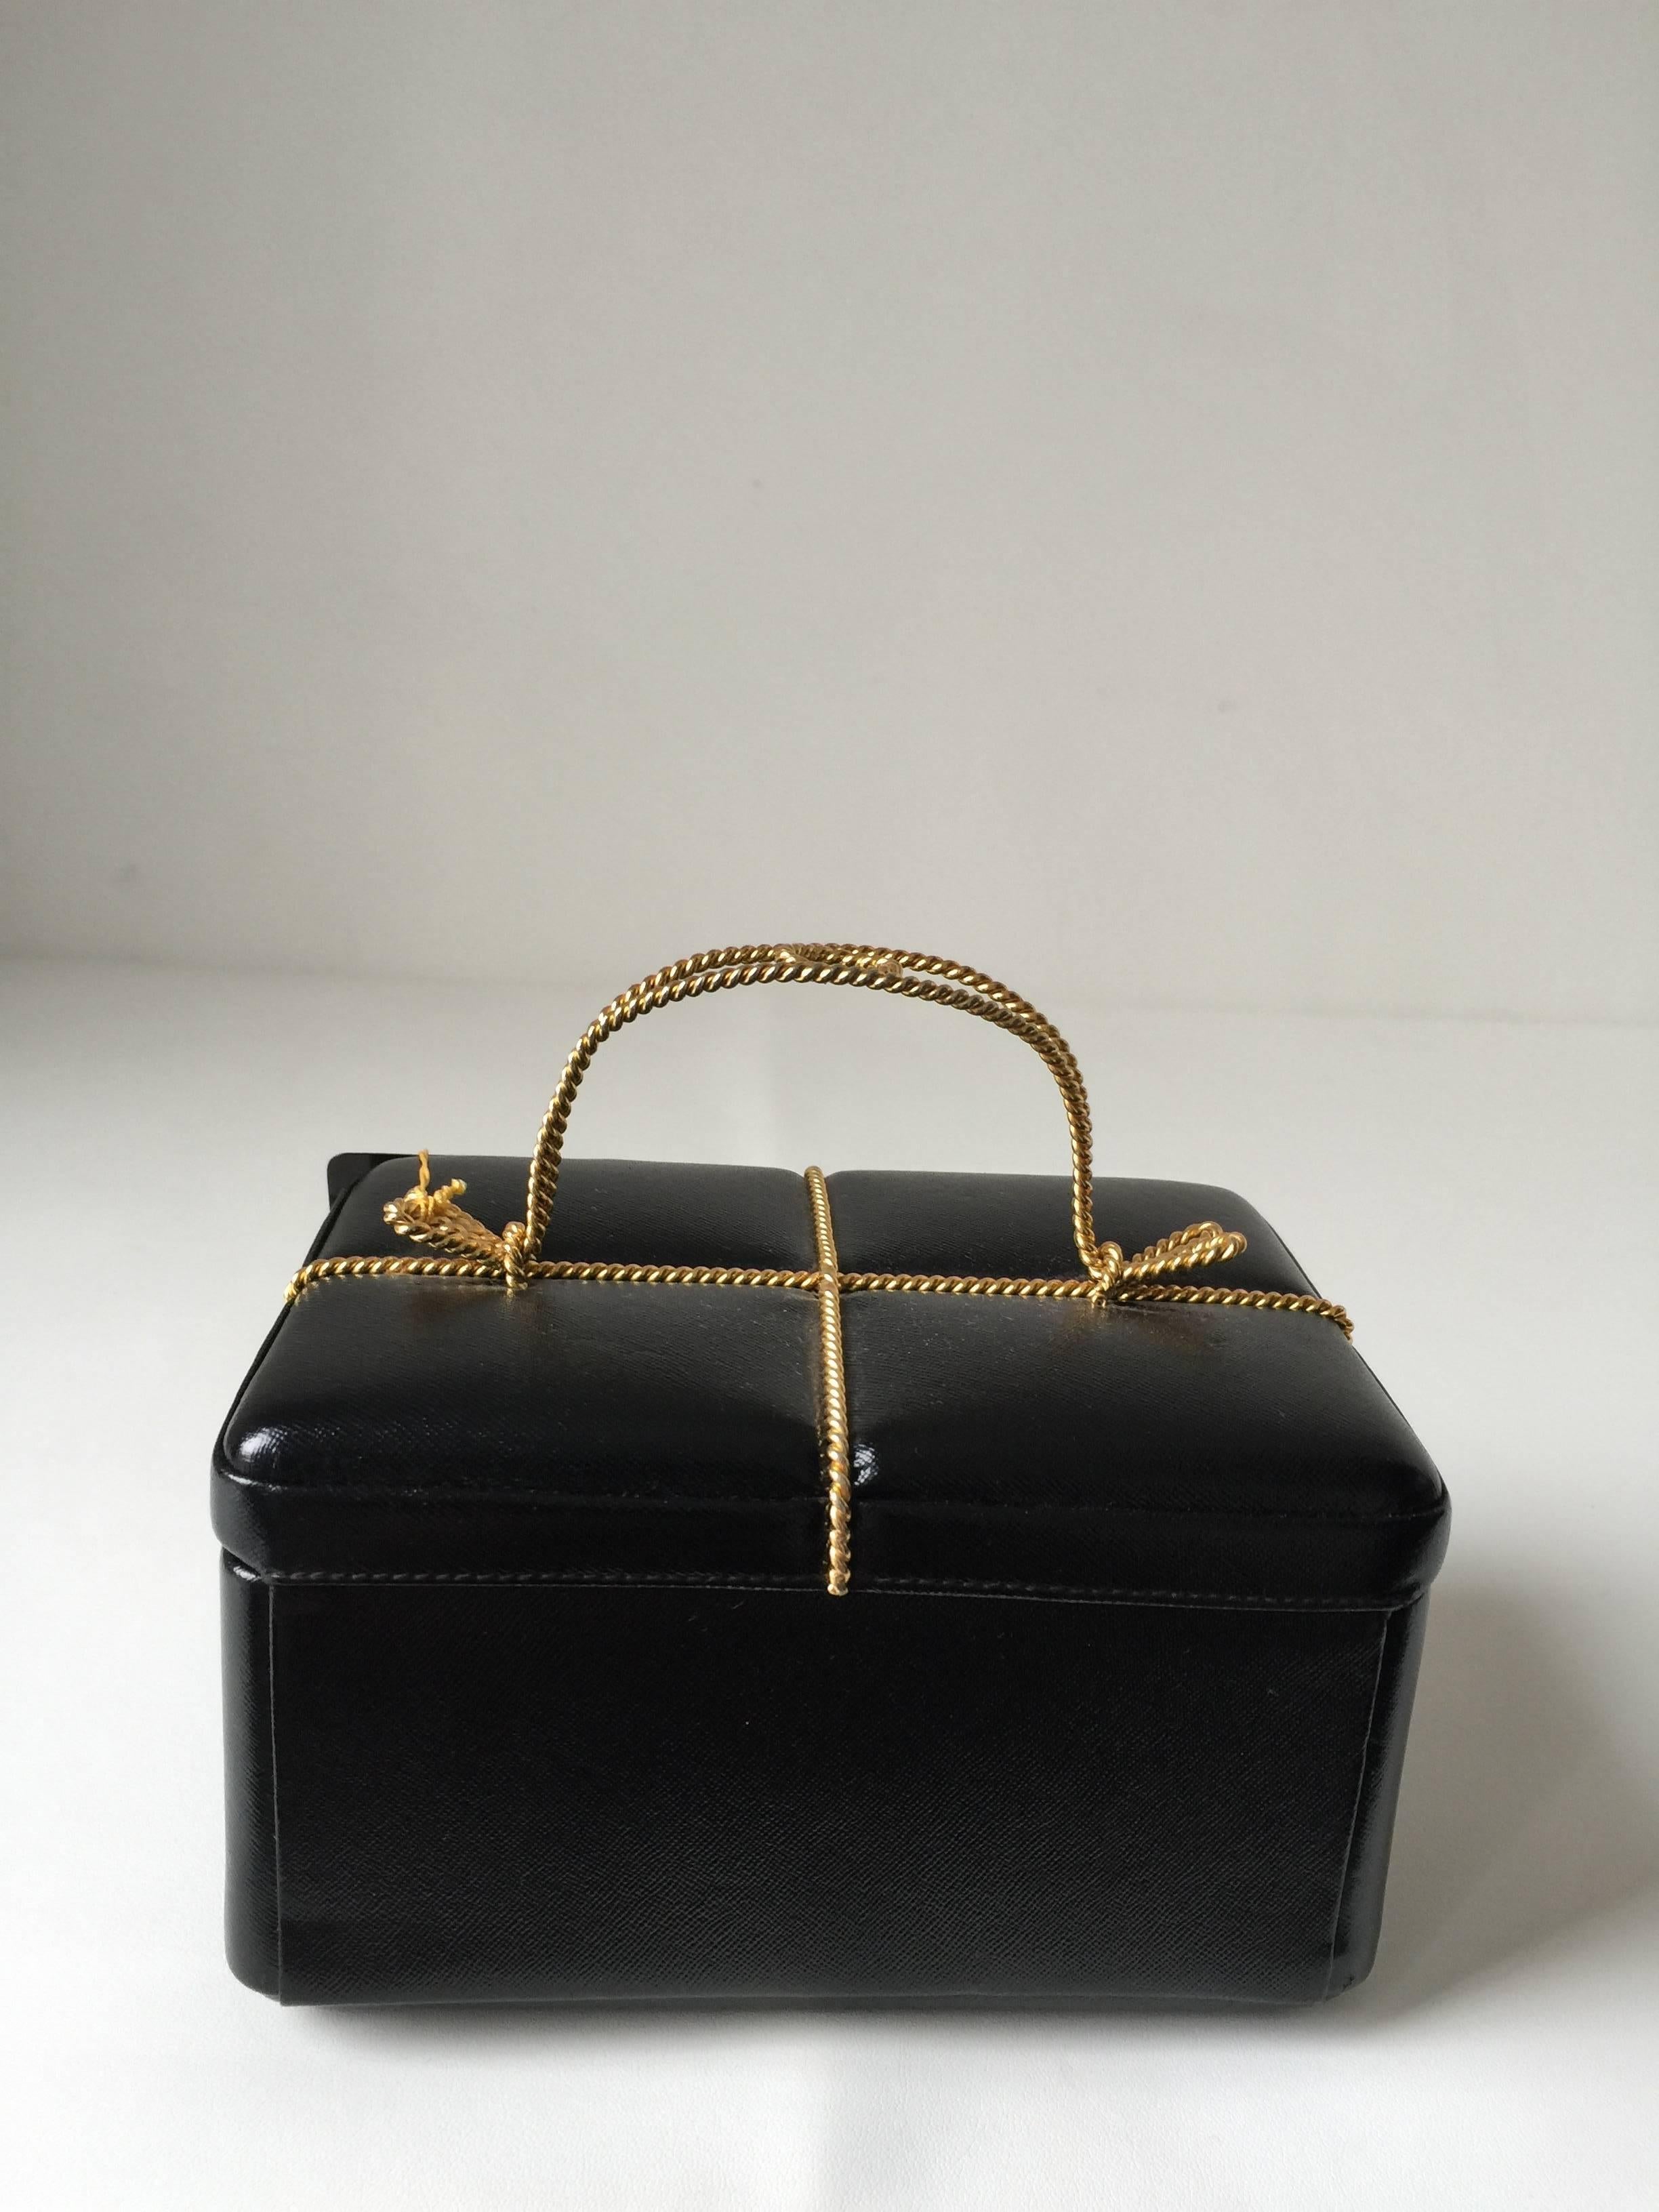 This is a very unique little handbag...vintage by Murray  Kruger....
won the handbag designer award... new never worn...perfect as a gift....
instead of chocolats....very whimsical...
